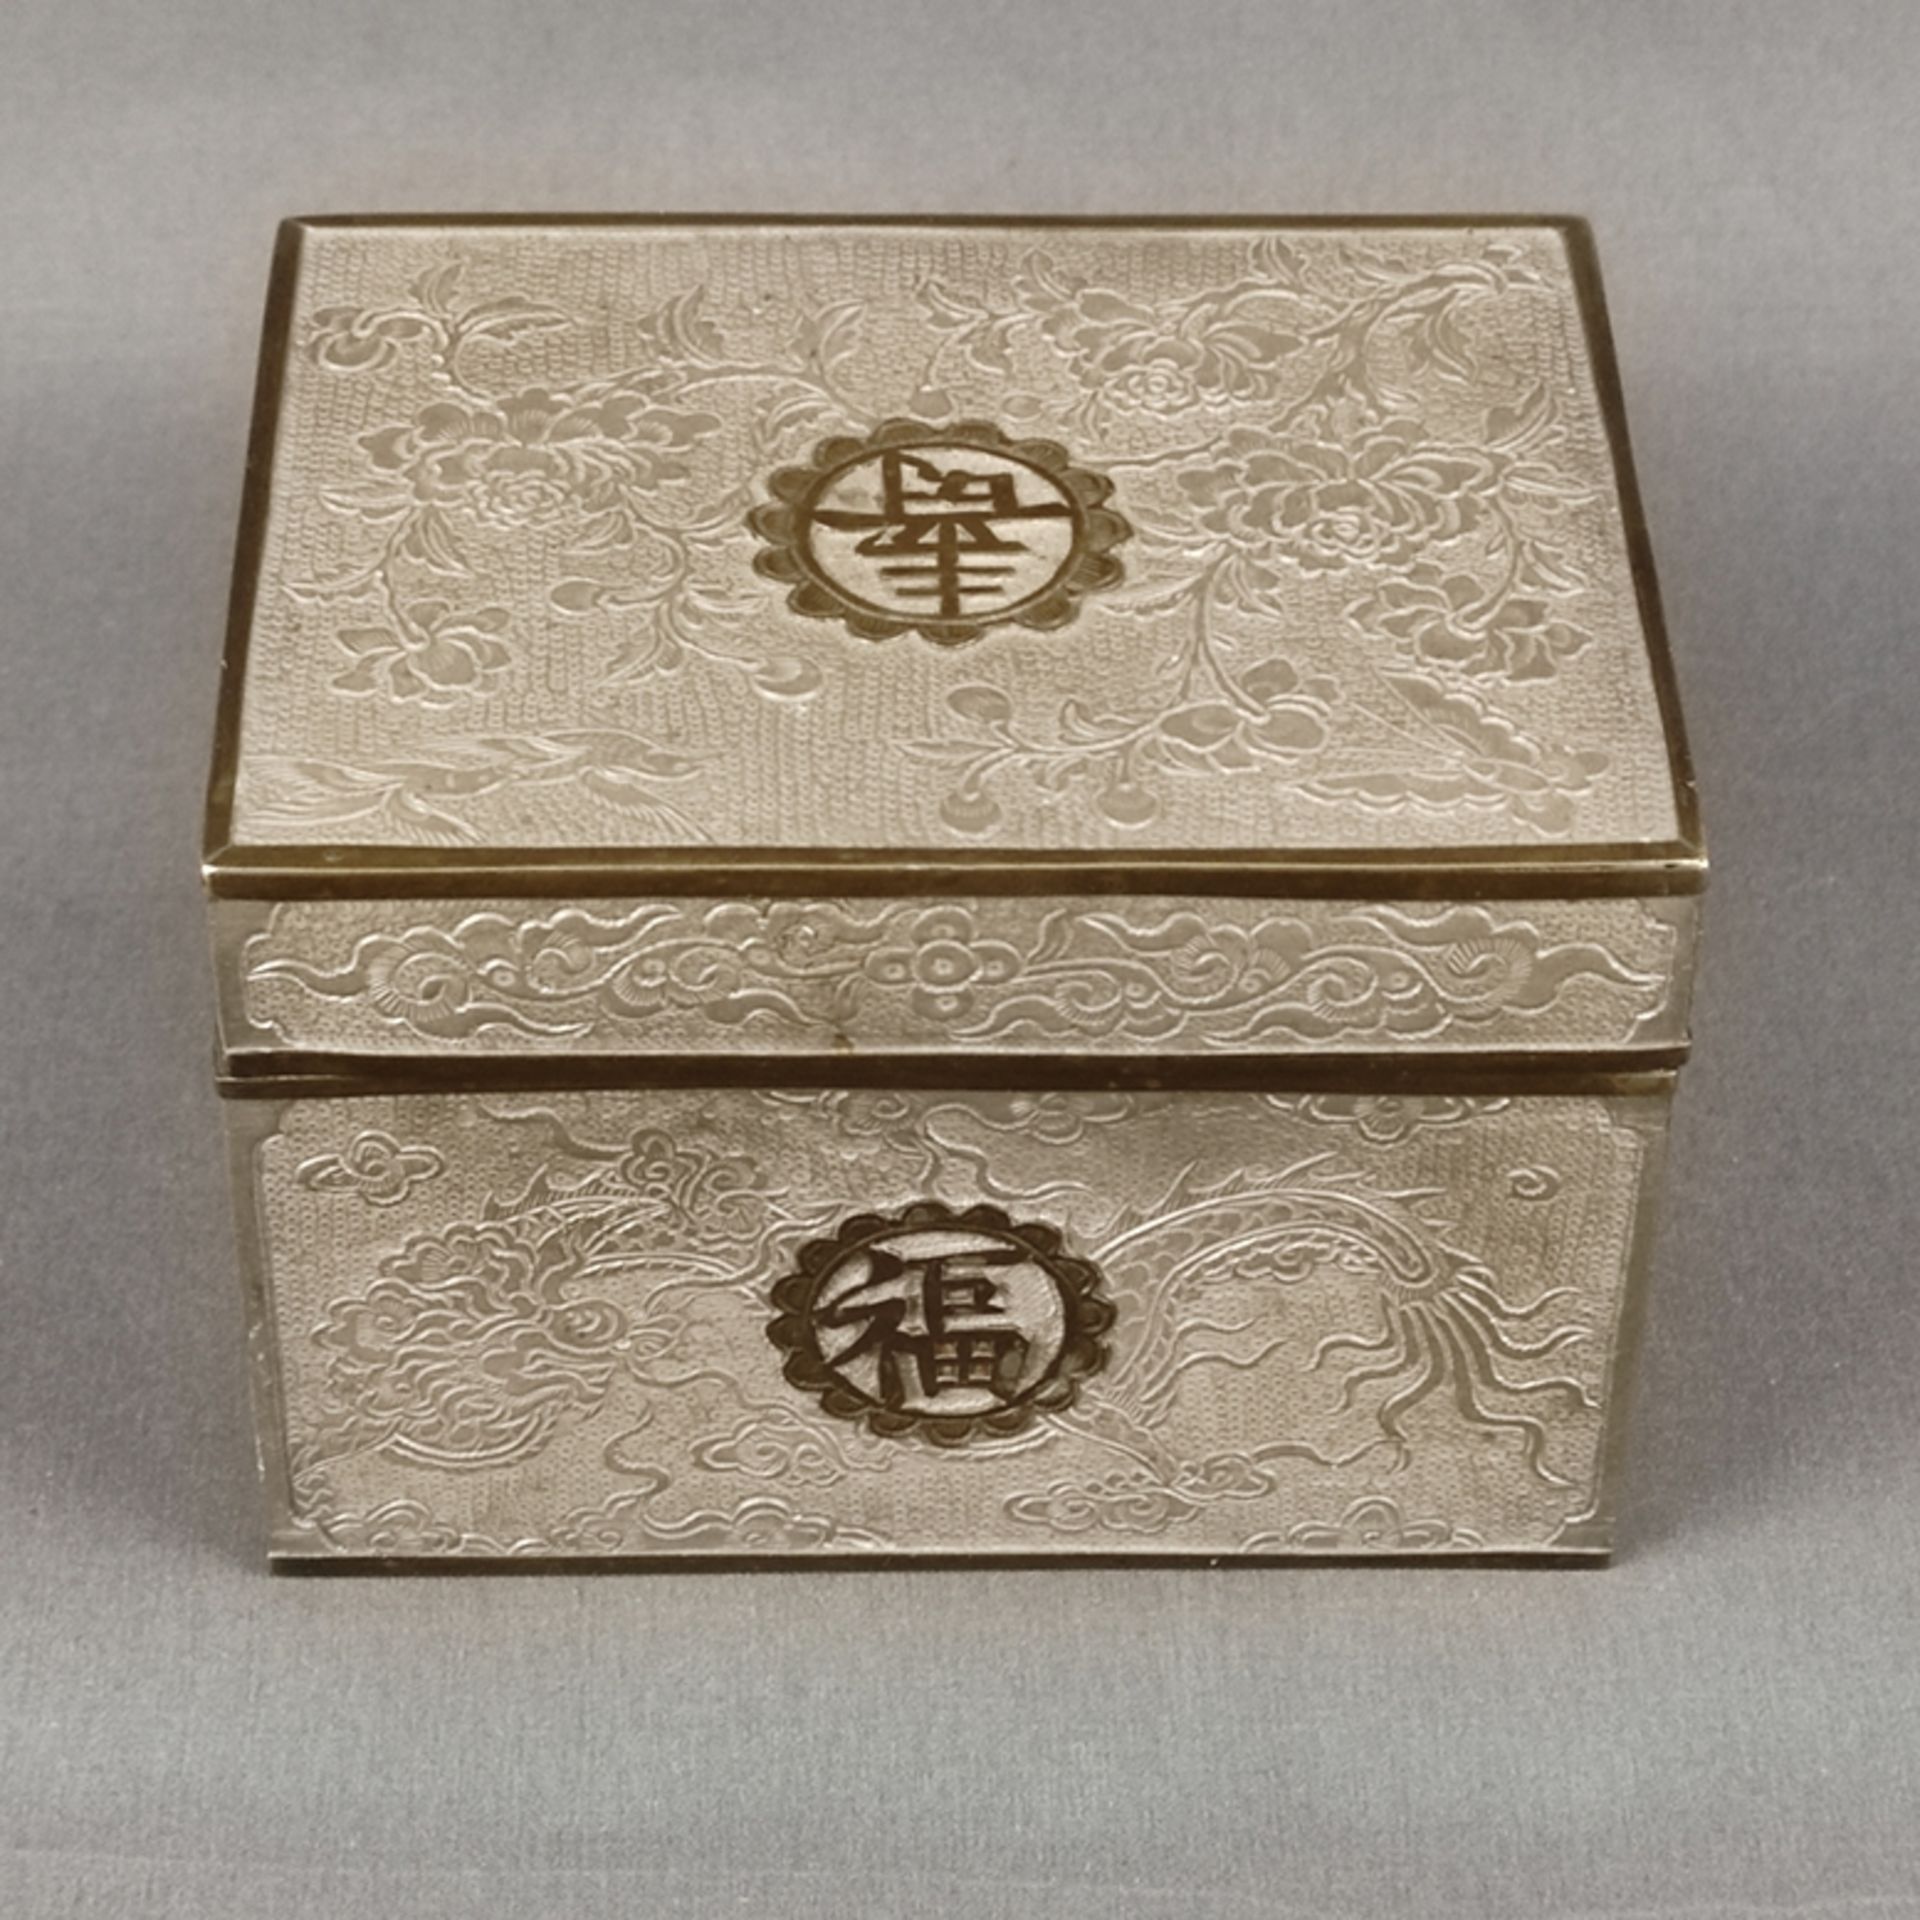 Tea caddy, China, pewter, relief decoration with floral motives and dragons, on each side writing c - Image 2 of 5